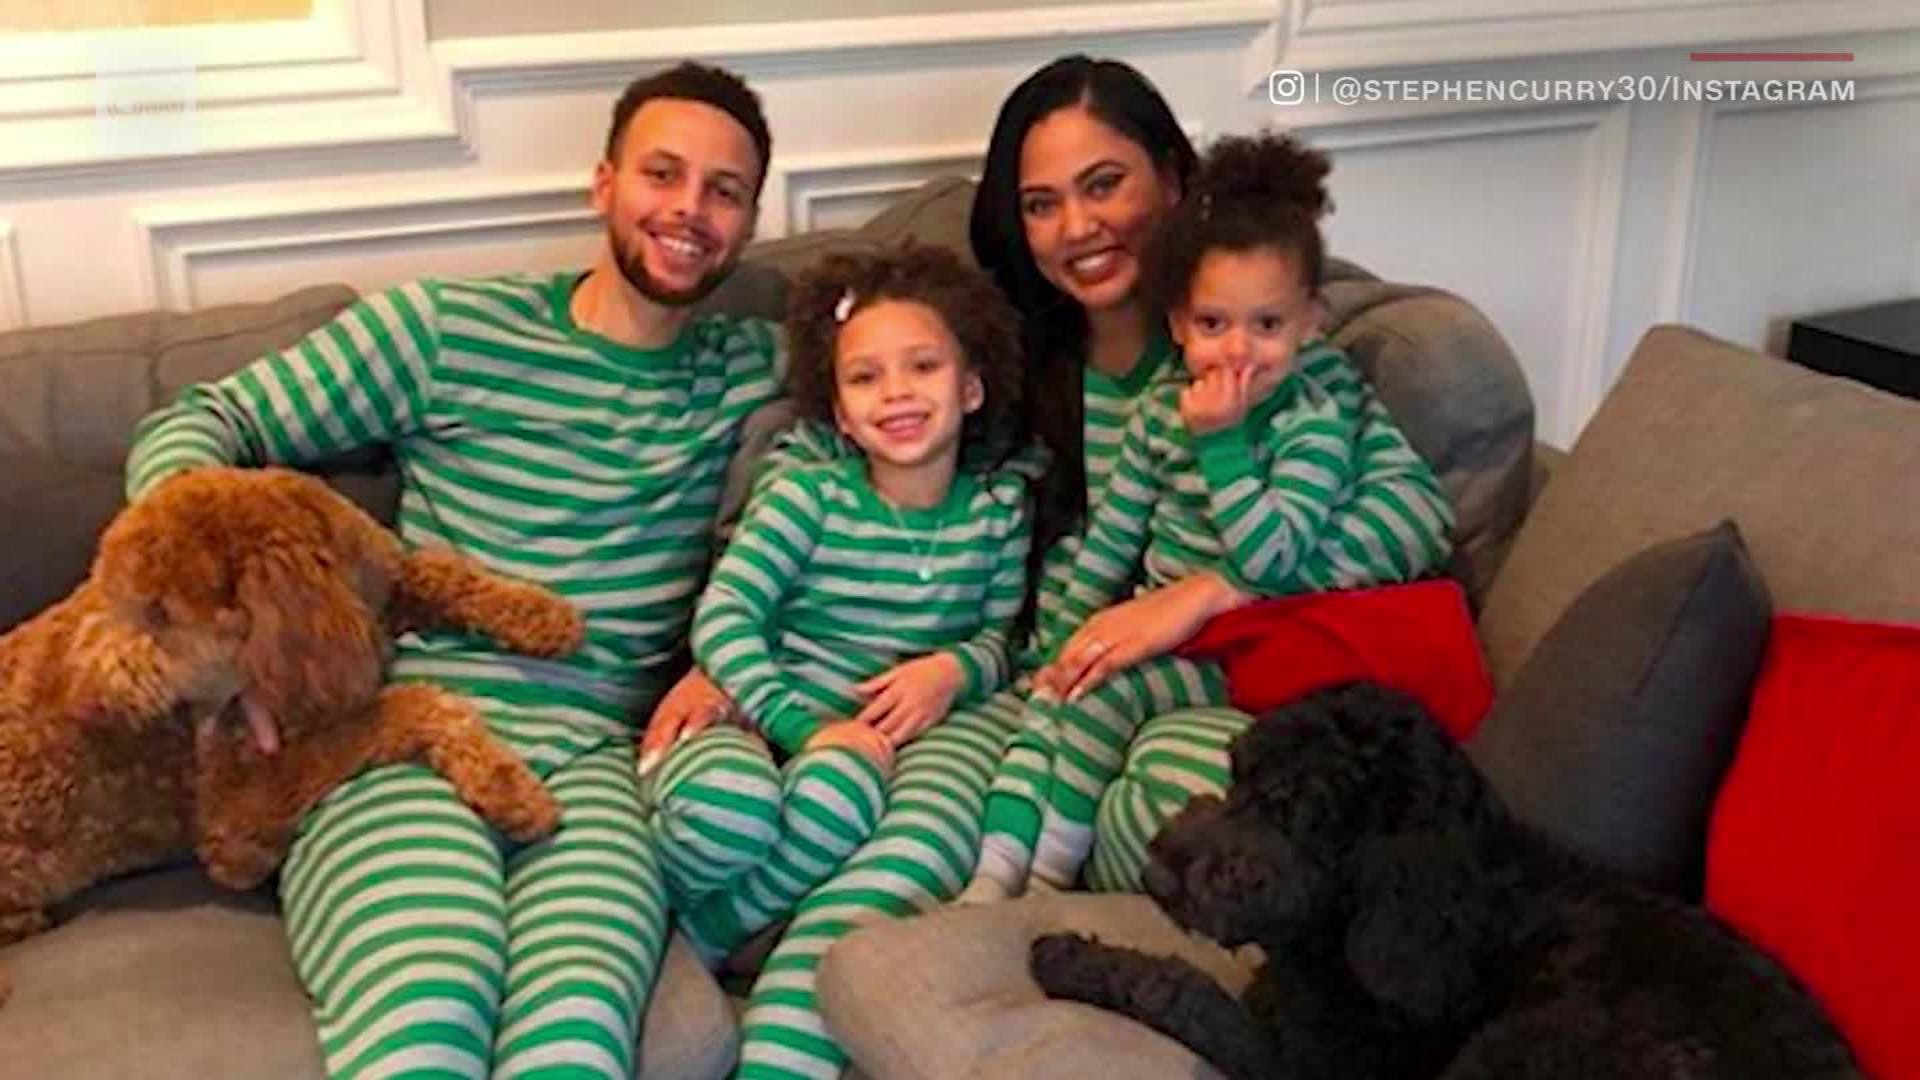 How Steph Curry is preparing for third child - CNN Video